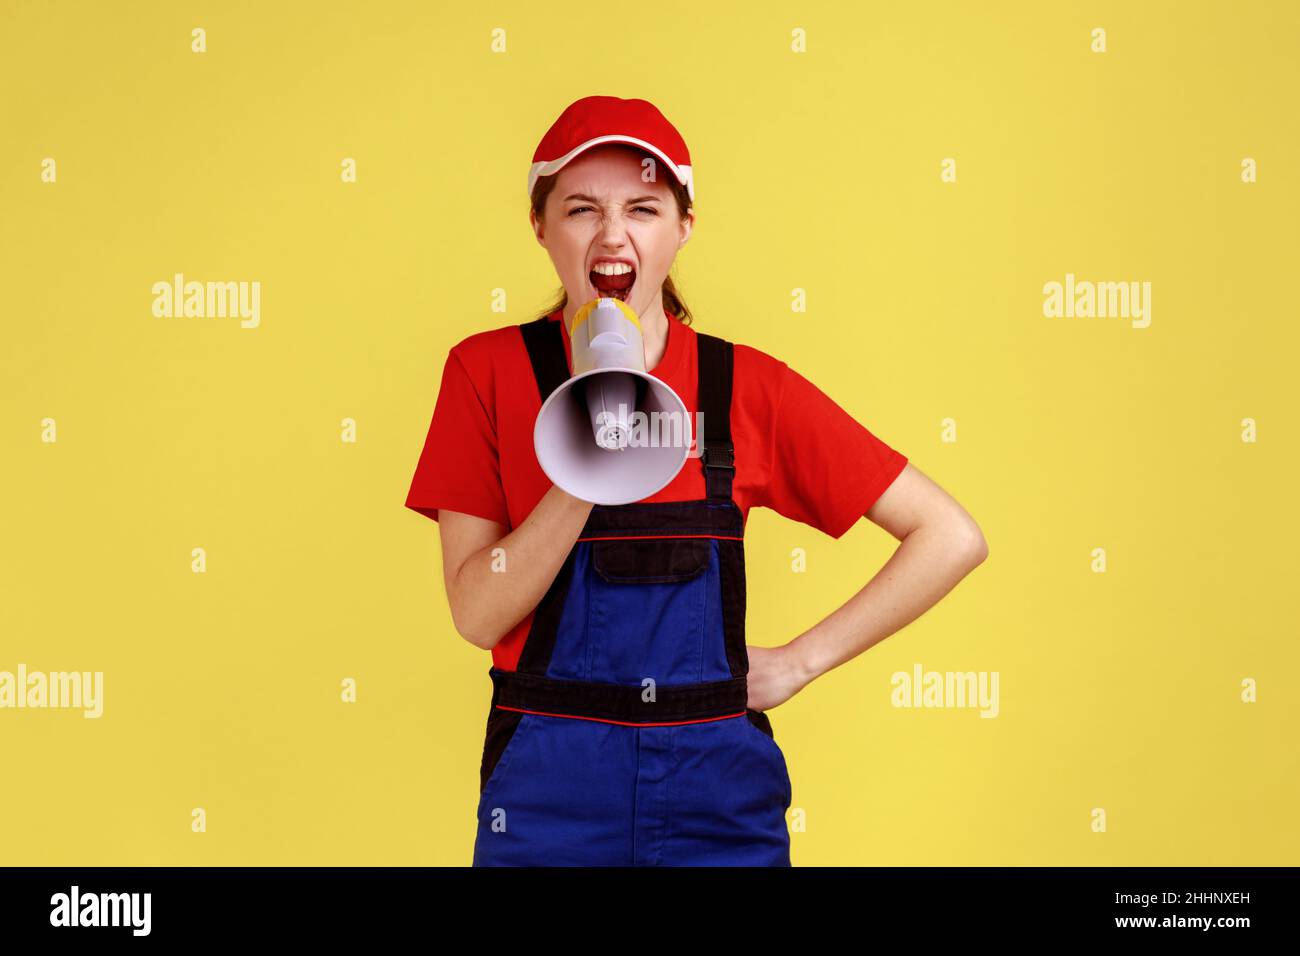 Portrait of angry worker woman screaming something with angry facial expression, protesting, keeps hand on hip, wearing overalls and red cap. Indoor studio shot isolated on yellow background. Stock Photo